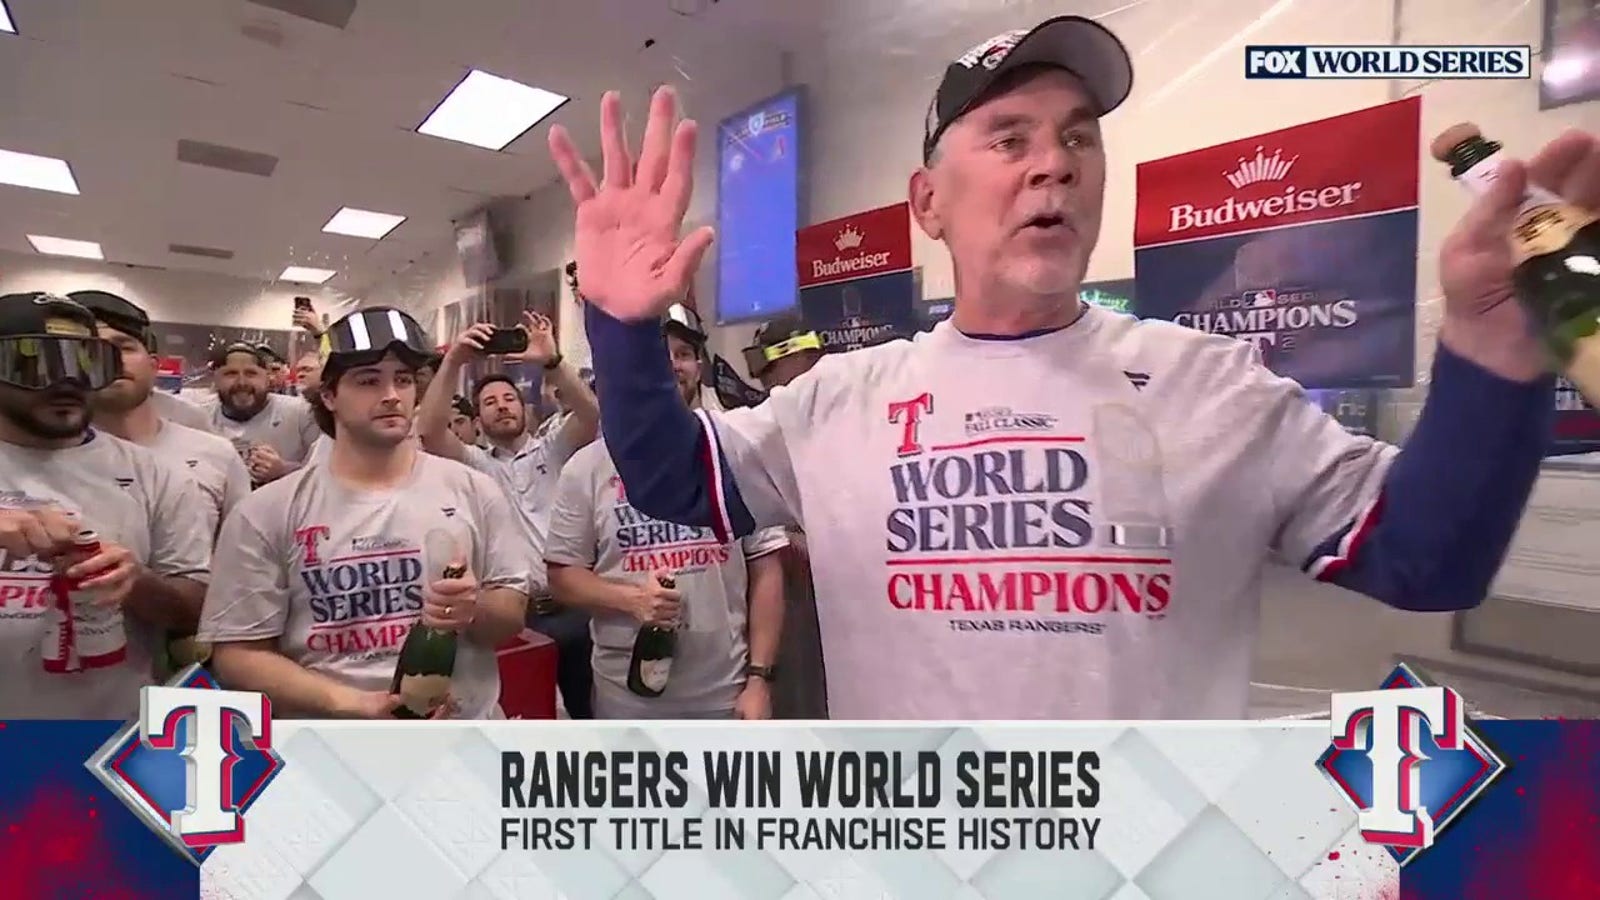 Bruce Bochy after Rangers' WS win: 'You guys just wrote history'